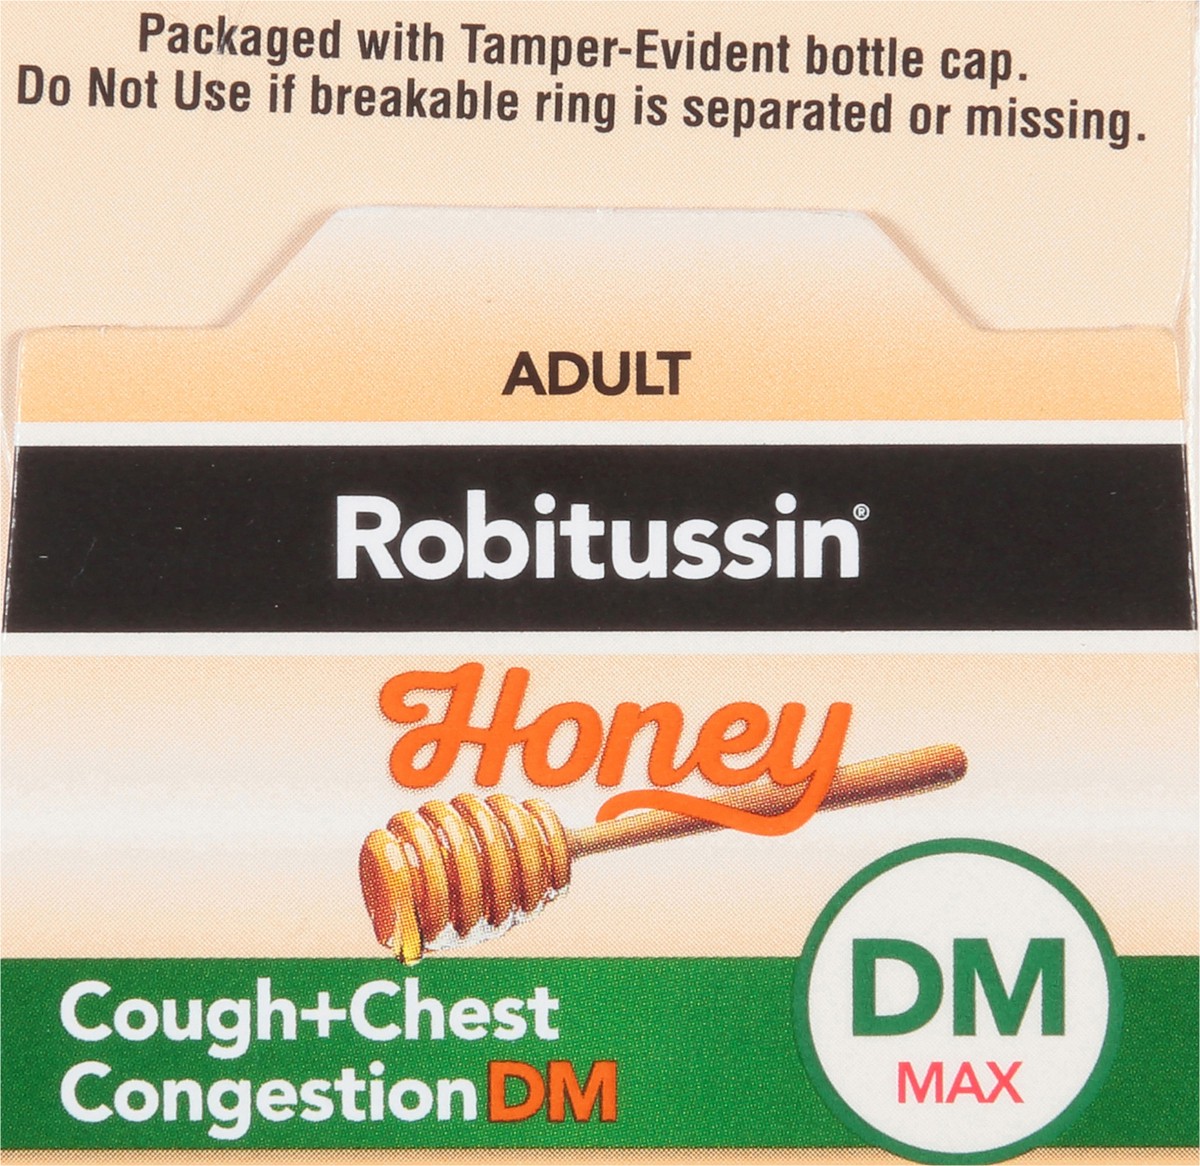 slide 9 of 9, Robitussin Maximum Strength Honey Cough + Chest Congestion DM, Cough Medicine for Cough and Chest Congestion Relief Made with Real Honey - 4 Fl Oz Bottle, 4 fl oz